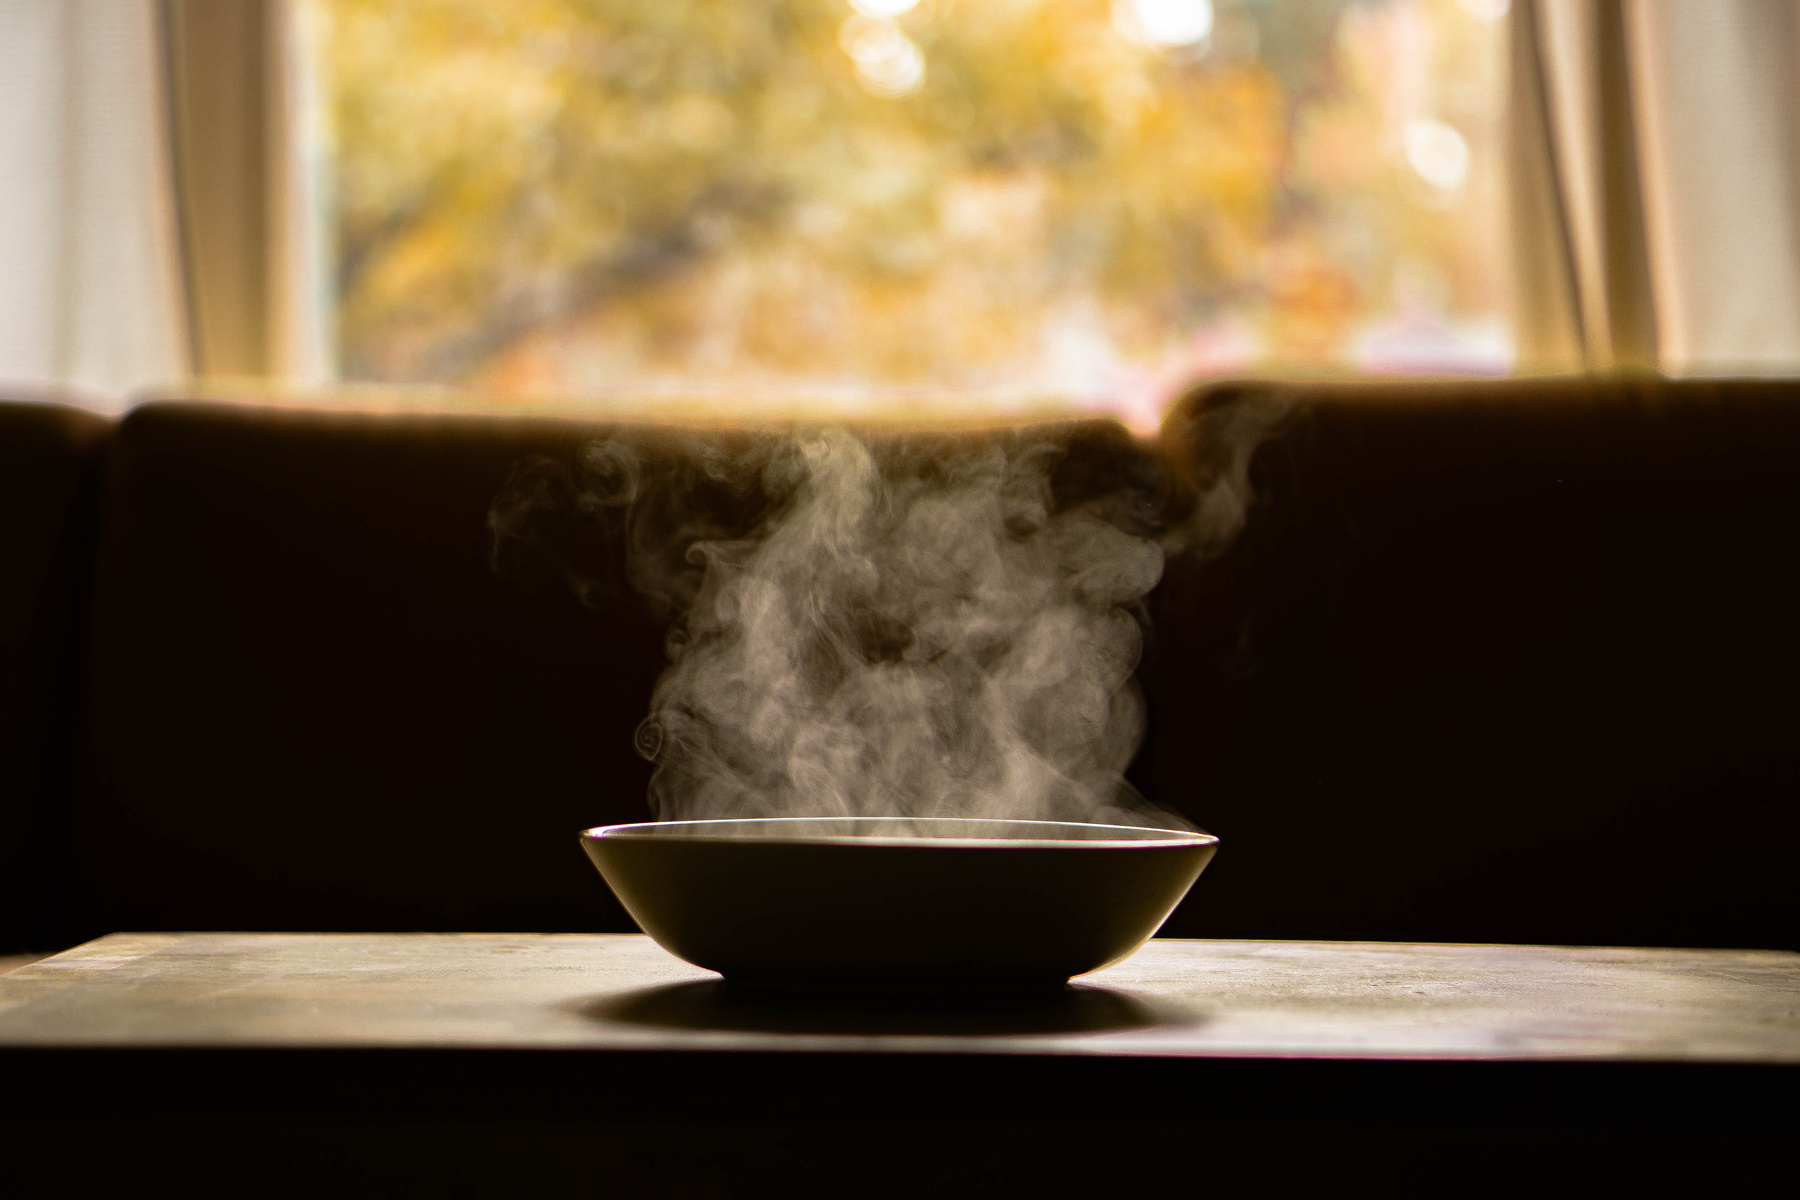 A Steaming Bowl of Soup